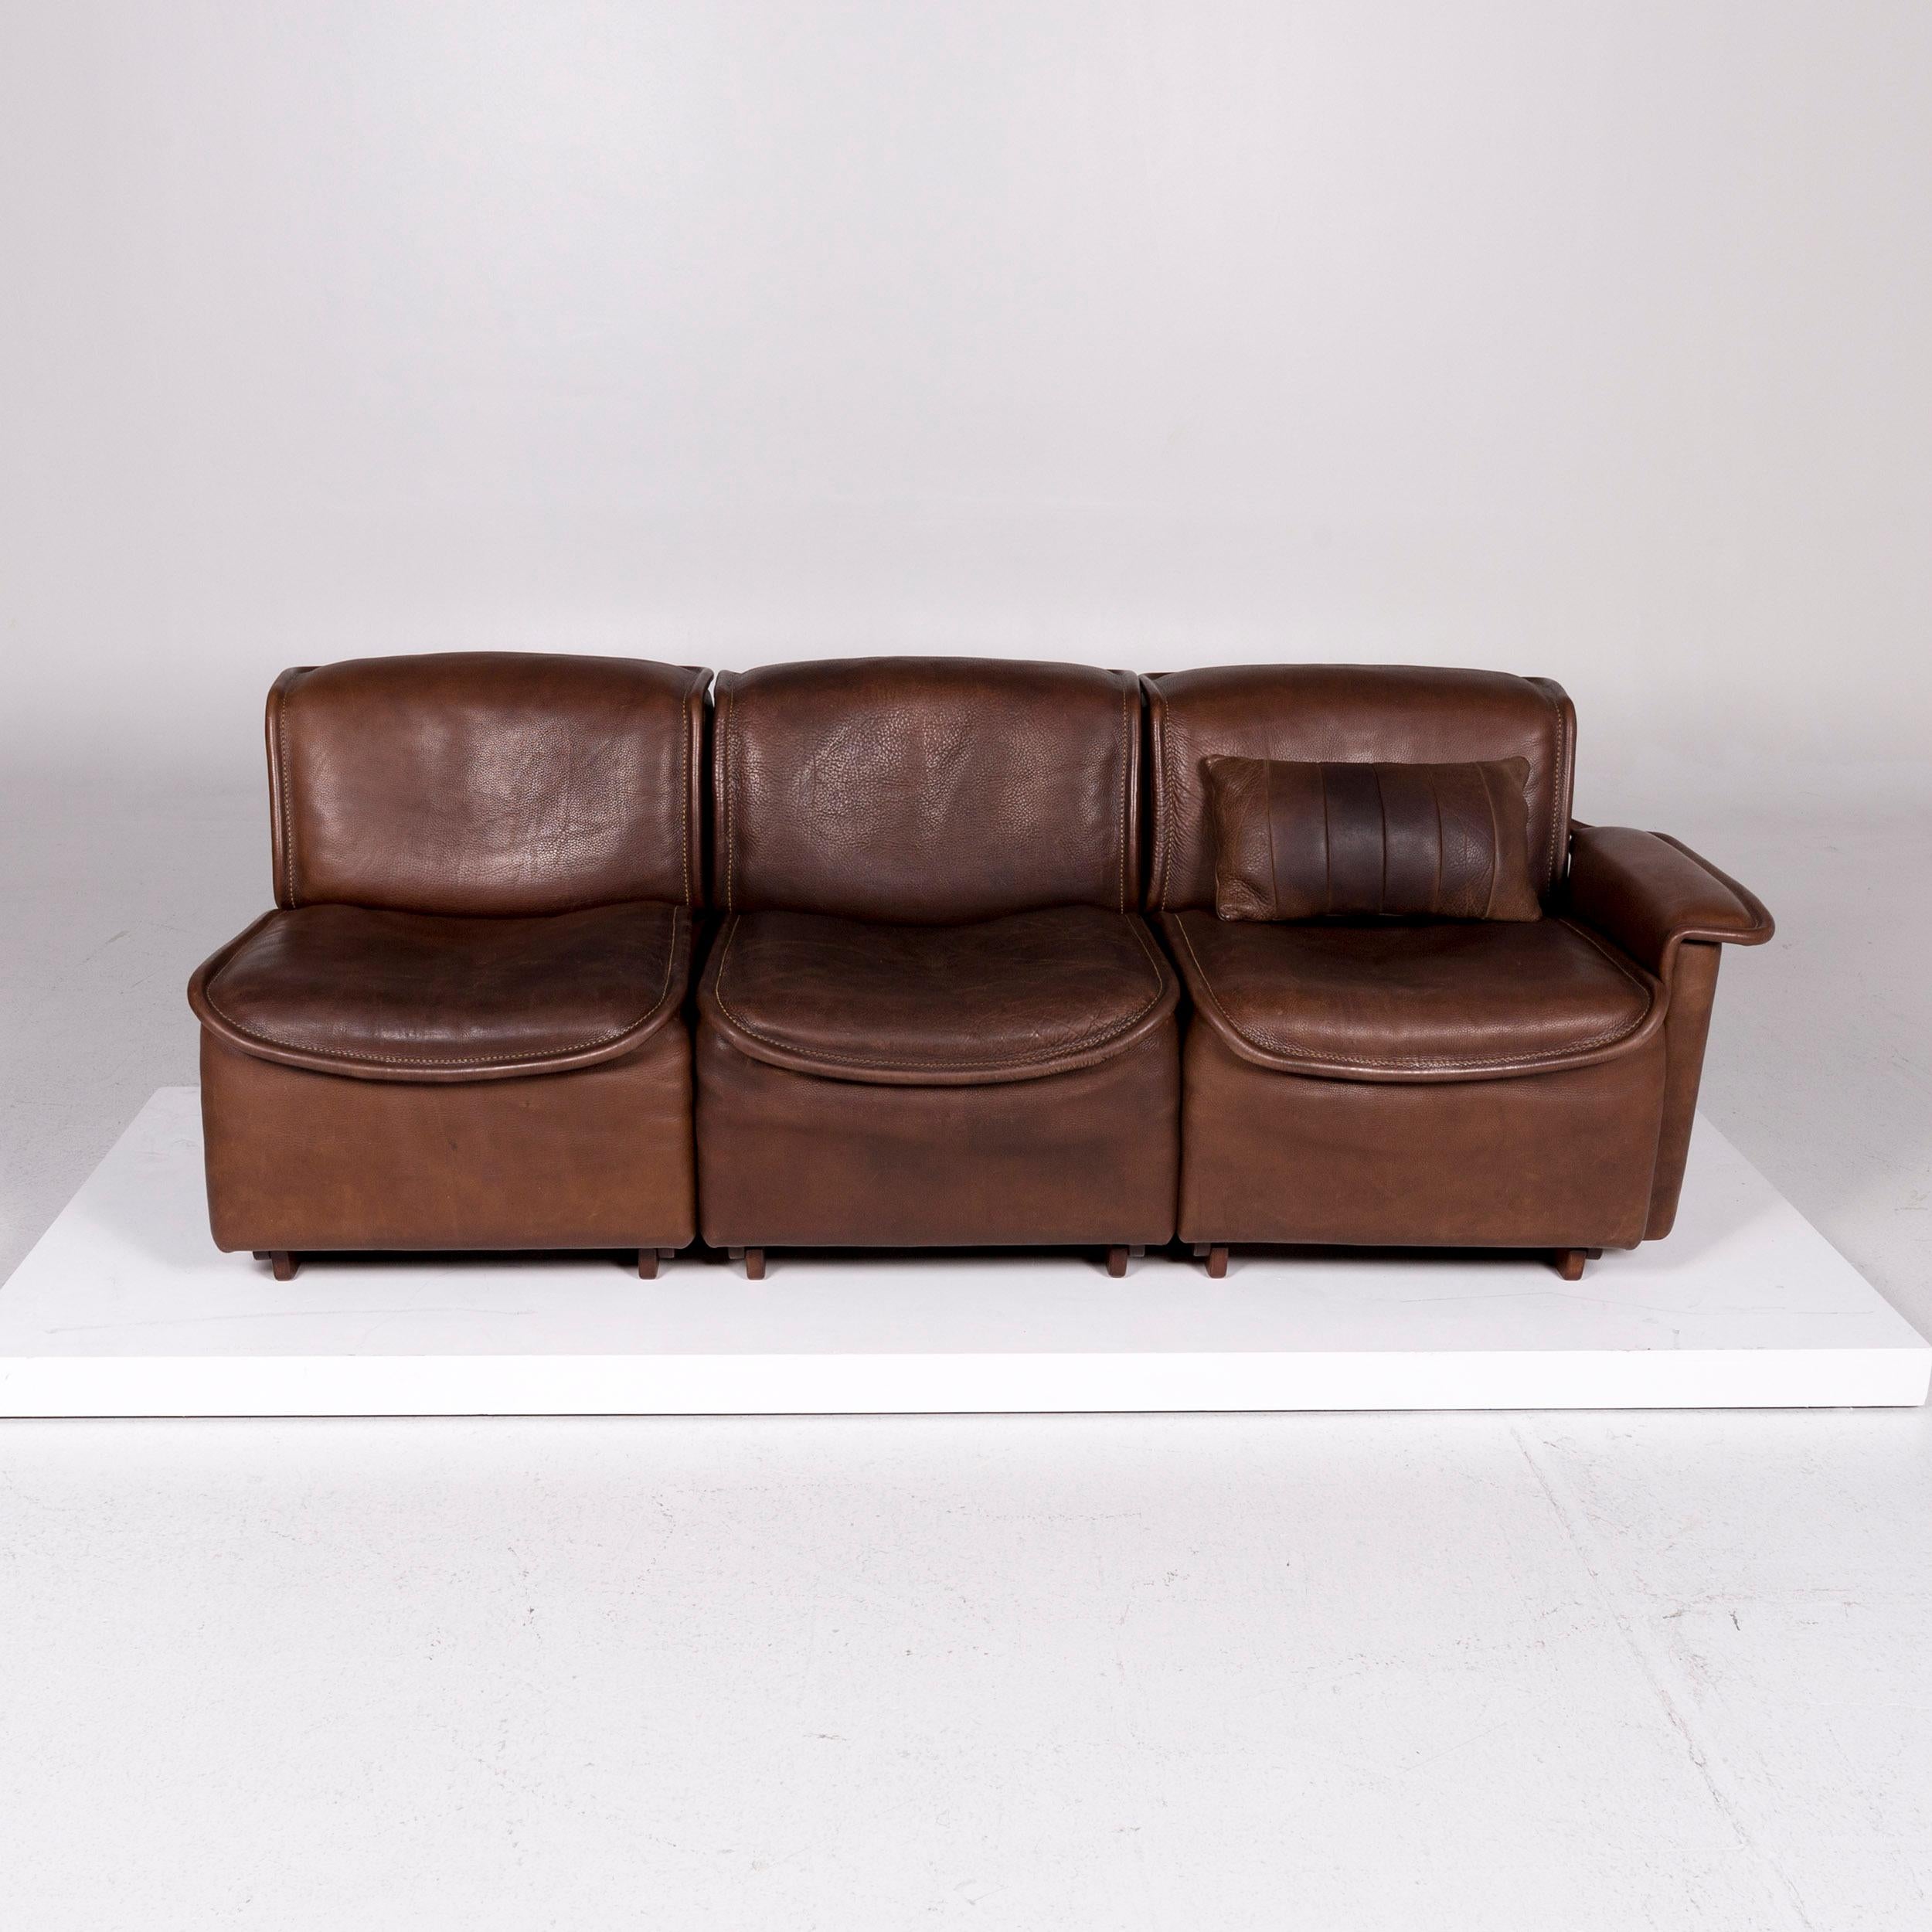 De Sede DS 12 Leather Sofa Set Braun 1 Three-Seat 1 Two-Seat Couch In Fair Condition For Sale In Cologne, DE